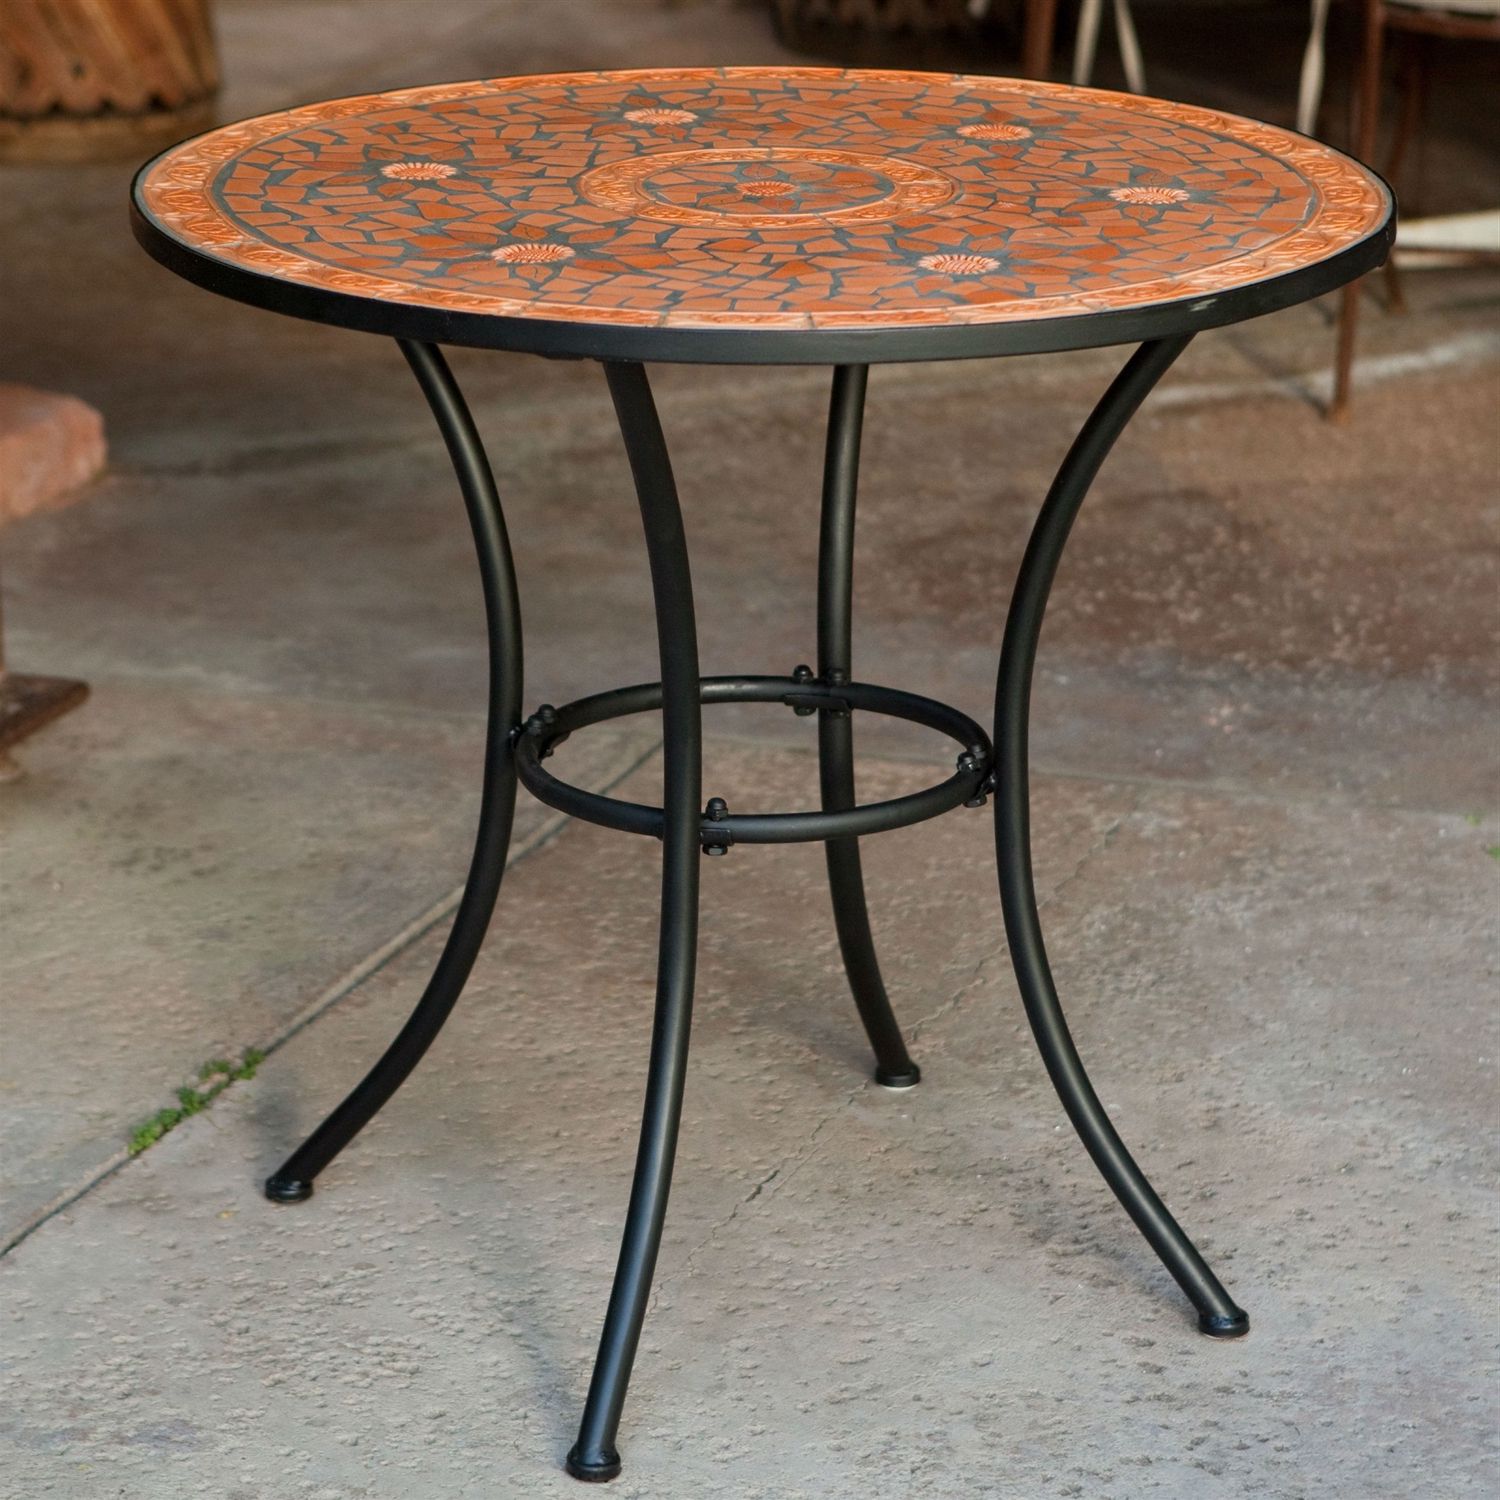 Widely Used Mosaic Outdoor Side Table – Grottepastenaecollepardo Within Mosaic Outdoor Accent Tables (View 13 of 15)